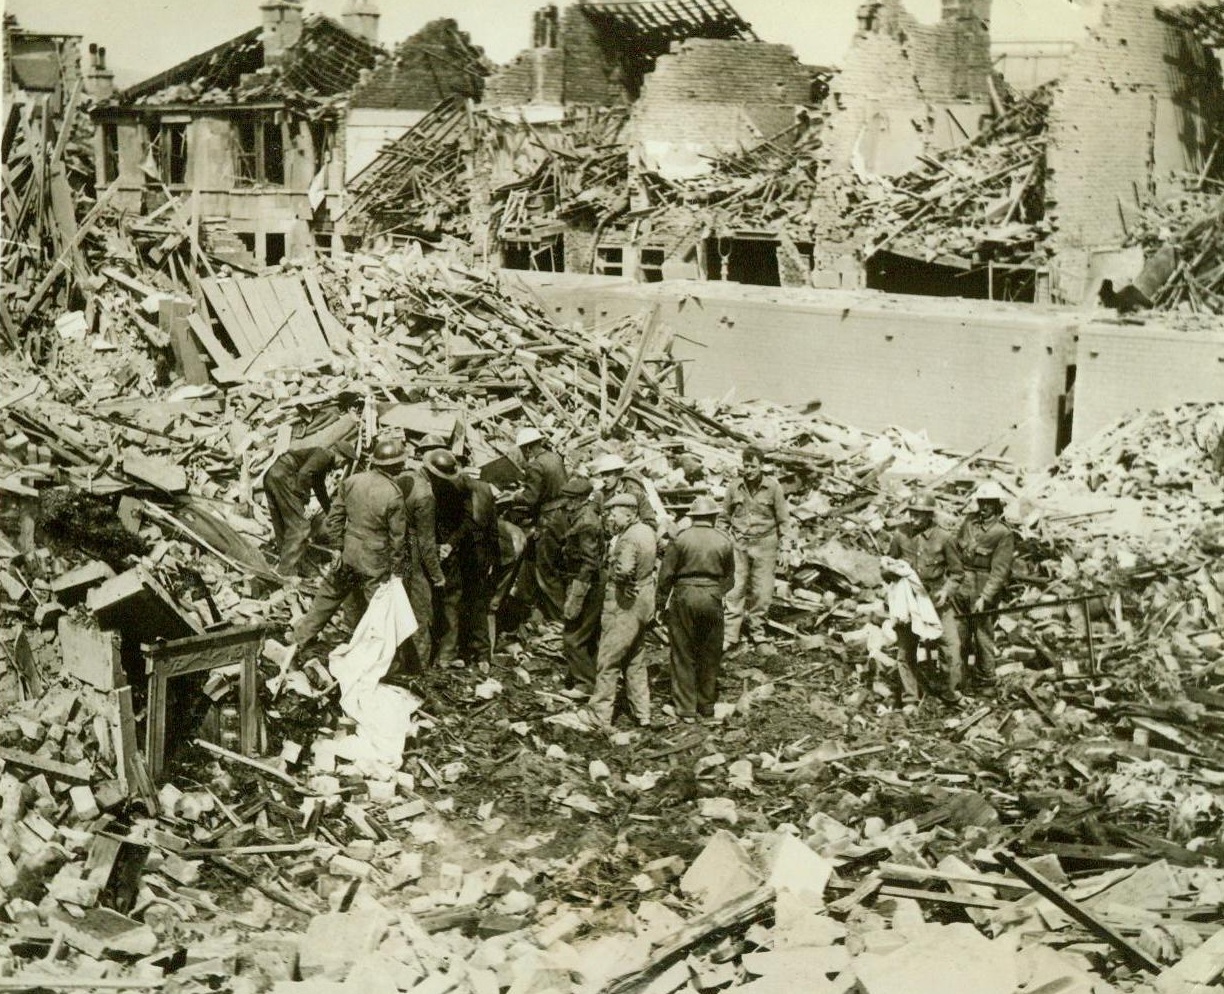 After Nazi Reprisal Raid, 5/18/1942. England - Civil Defense workers search the ruins of buildings bombed in the recent German reprisal raid on Bath, a village in Southwest England which housed evacuees from blitzed areas. In background are air raid shelters which remained intact although structures all around were shattered. (Passed by Censor) Credit: ACME;